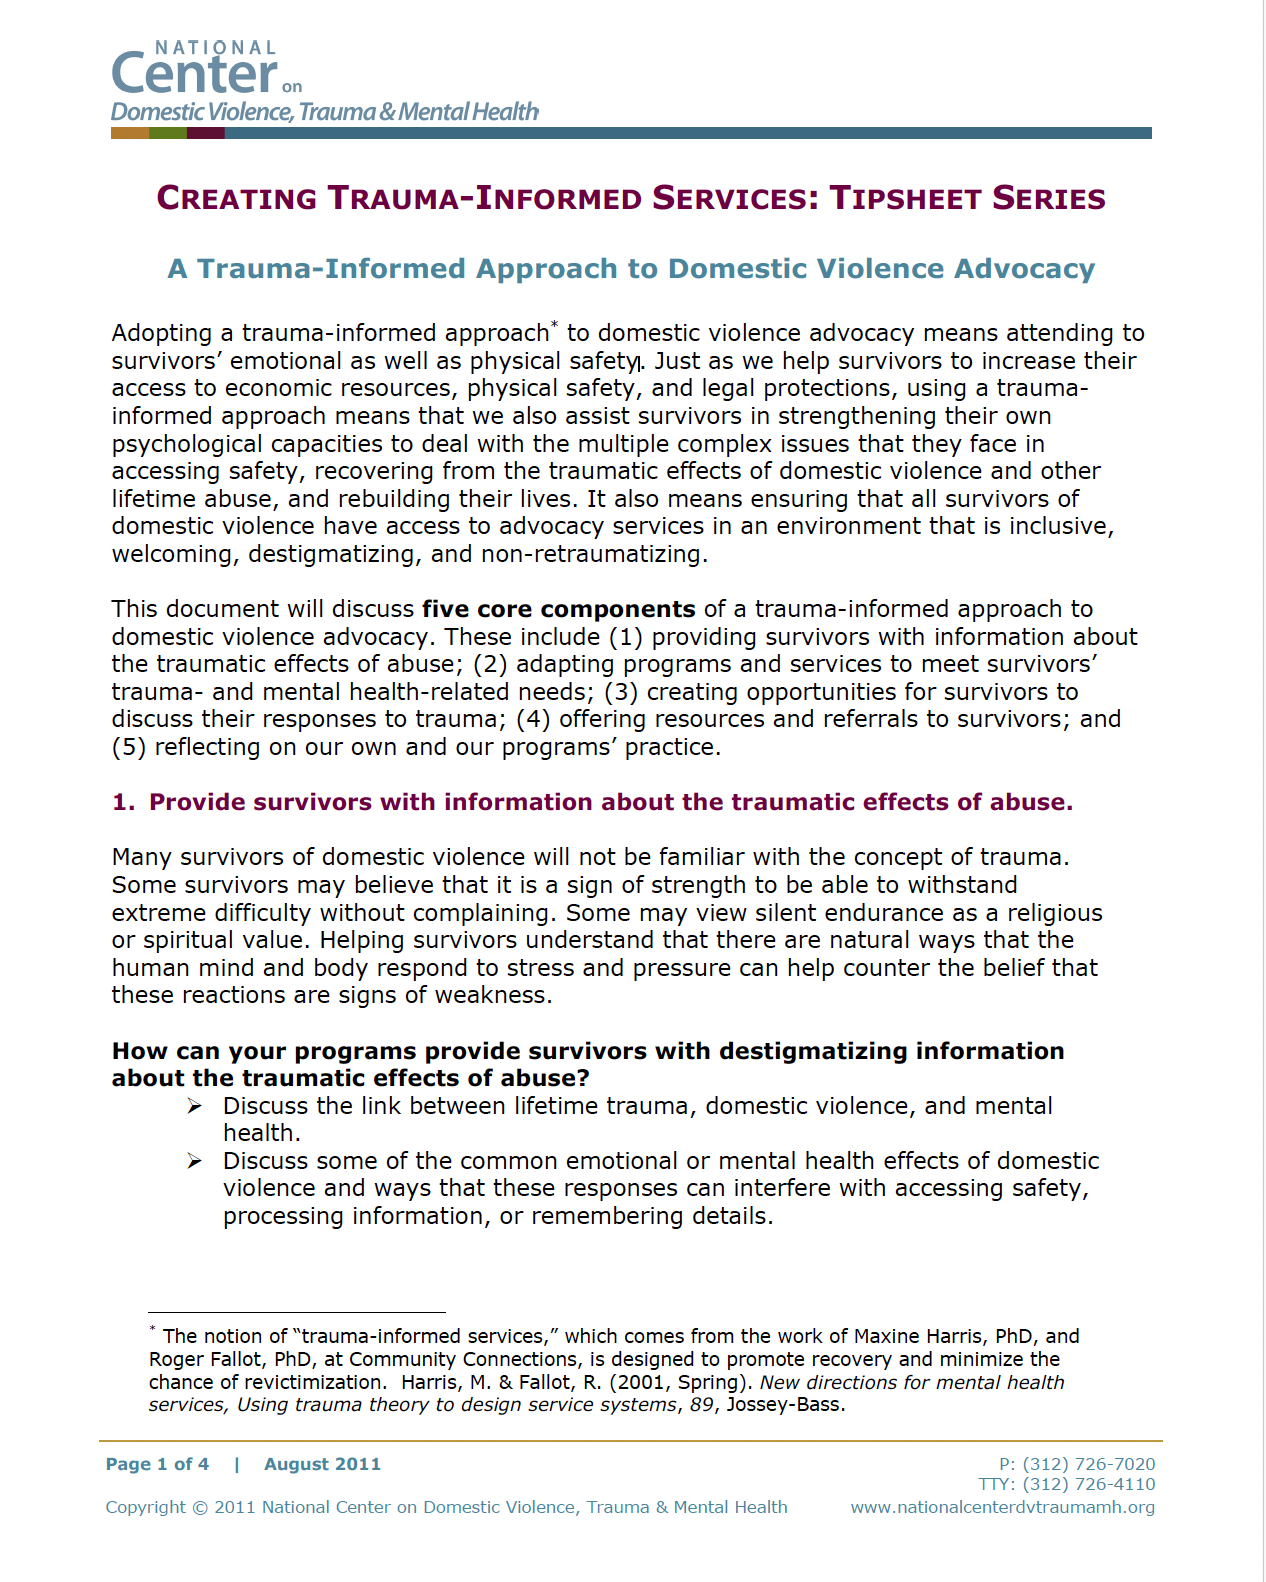 This document is about creating trauma-informed services for domestic violence advocacy, focusing on the emotional and psychological needs of survivors.